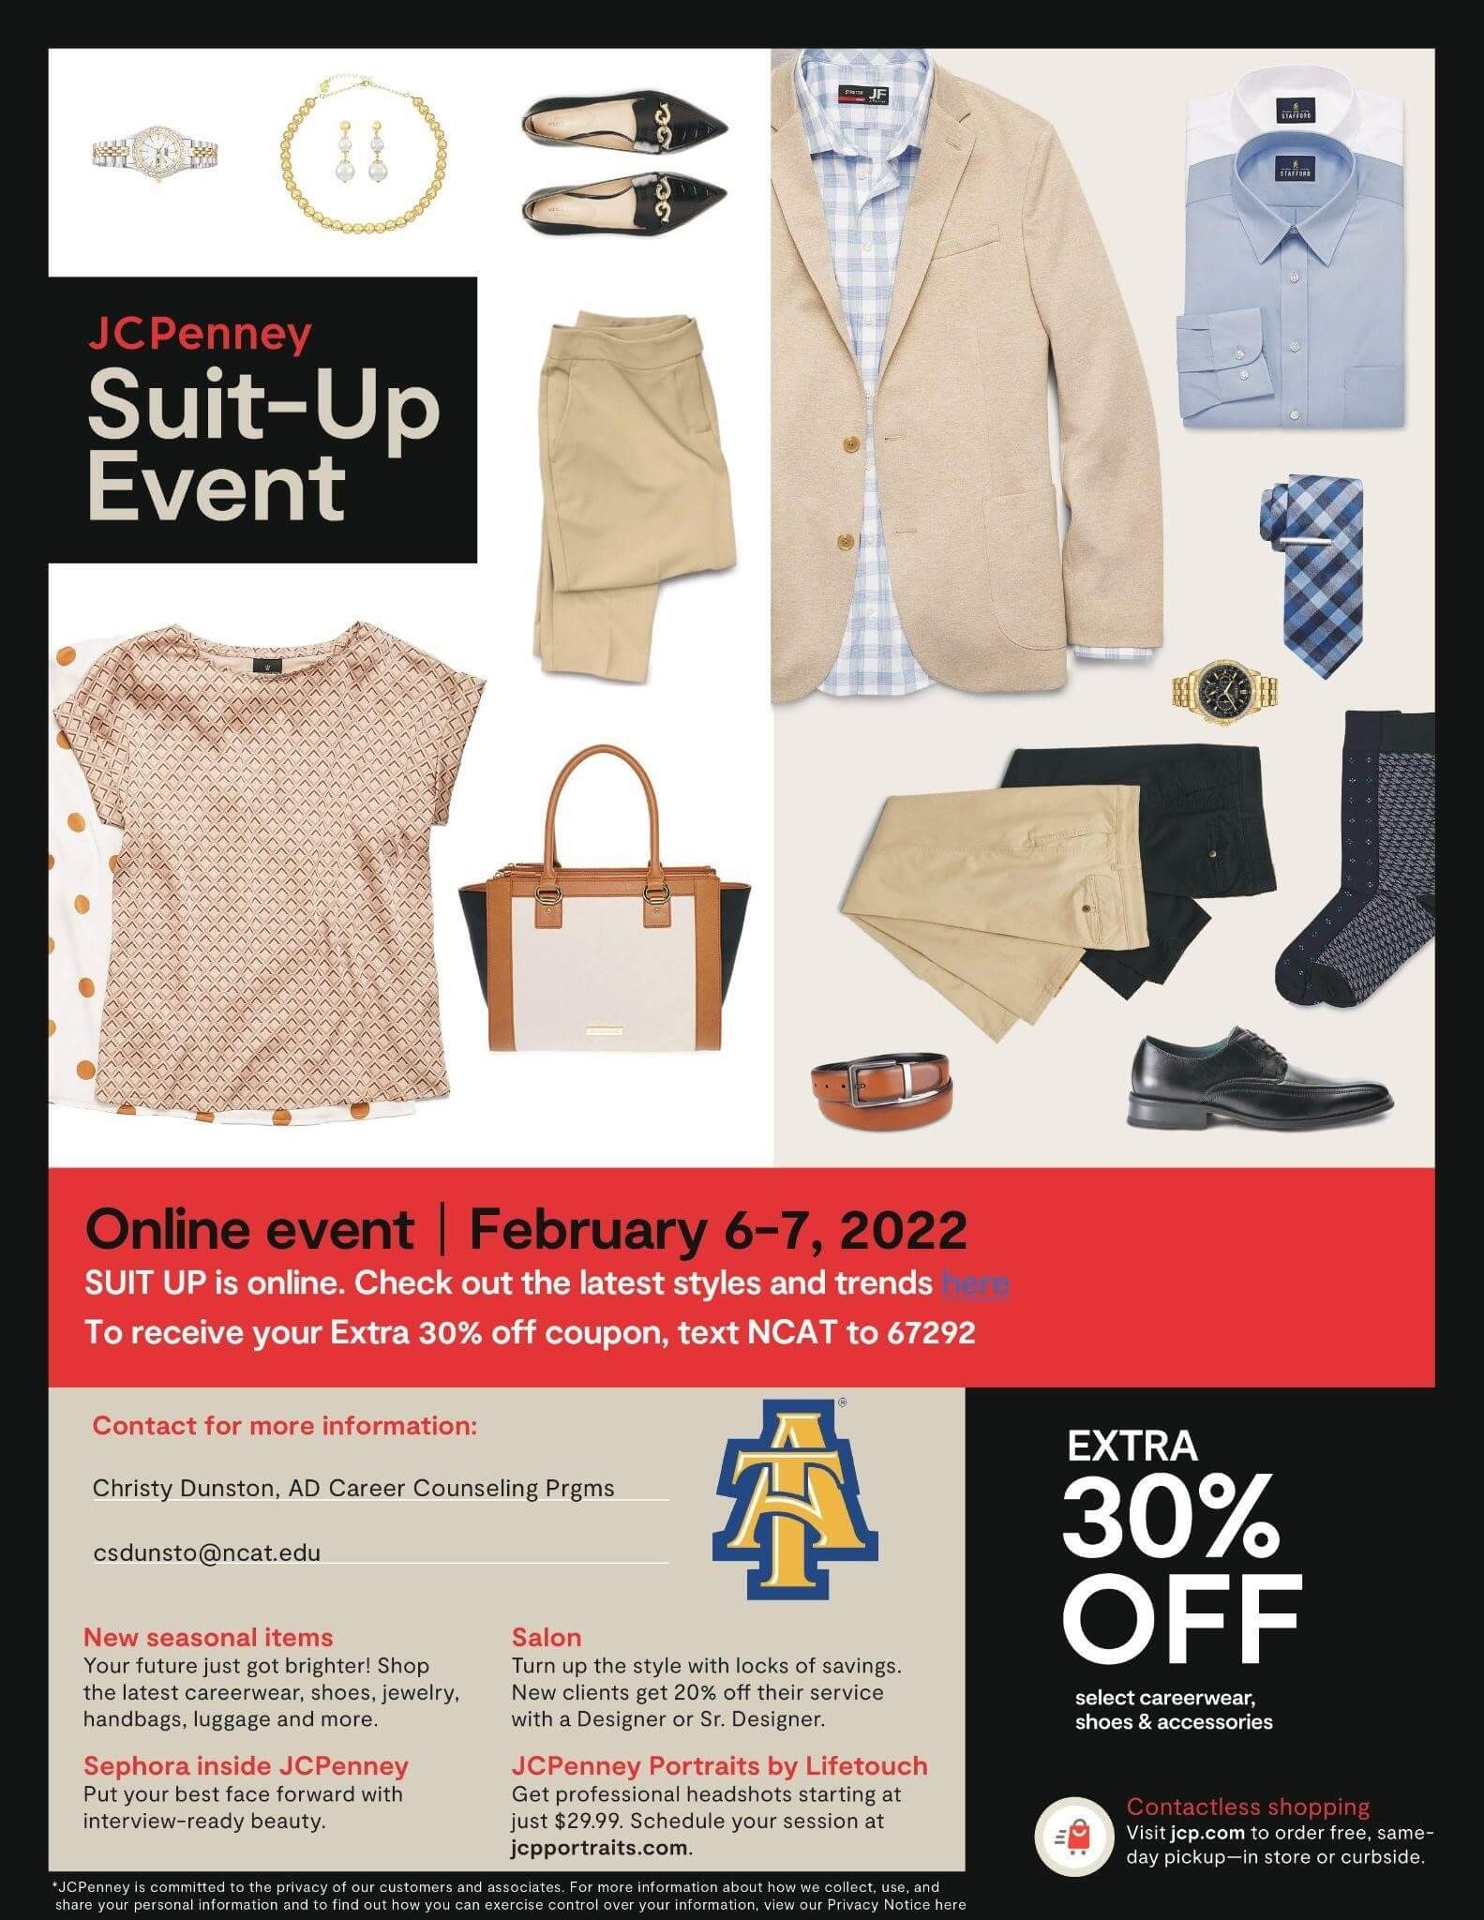 JCPenney Suit-Up Event graphic